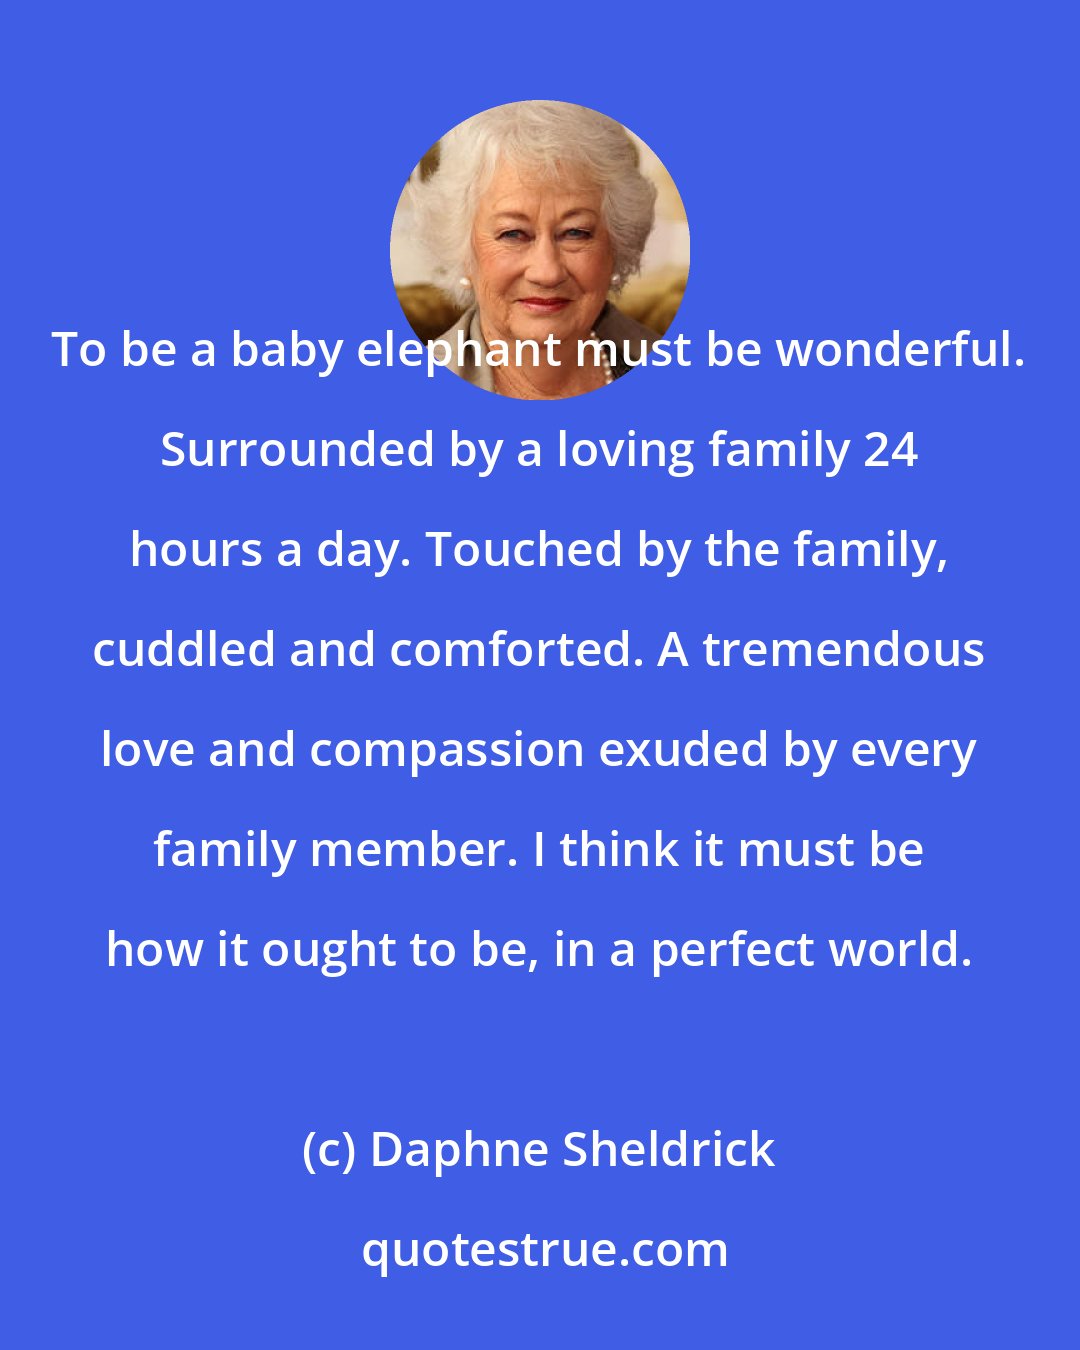 Daphne Sheldrick: To be a baby elephant must be wonderful. Surrounded by a loving family 24 hours a day. Touched by the family, cuddled and comforted. A tremendous love and compassion exuded by every family member. I think it must be how it ought to be, in a perfect world.